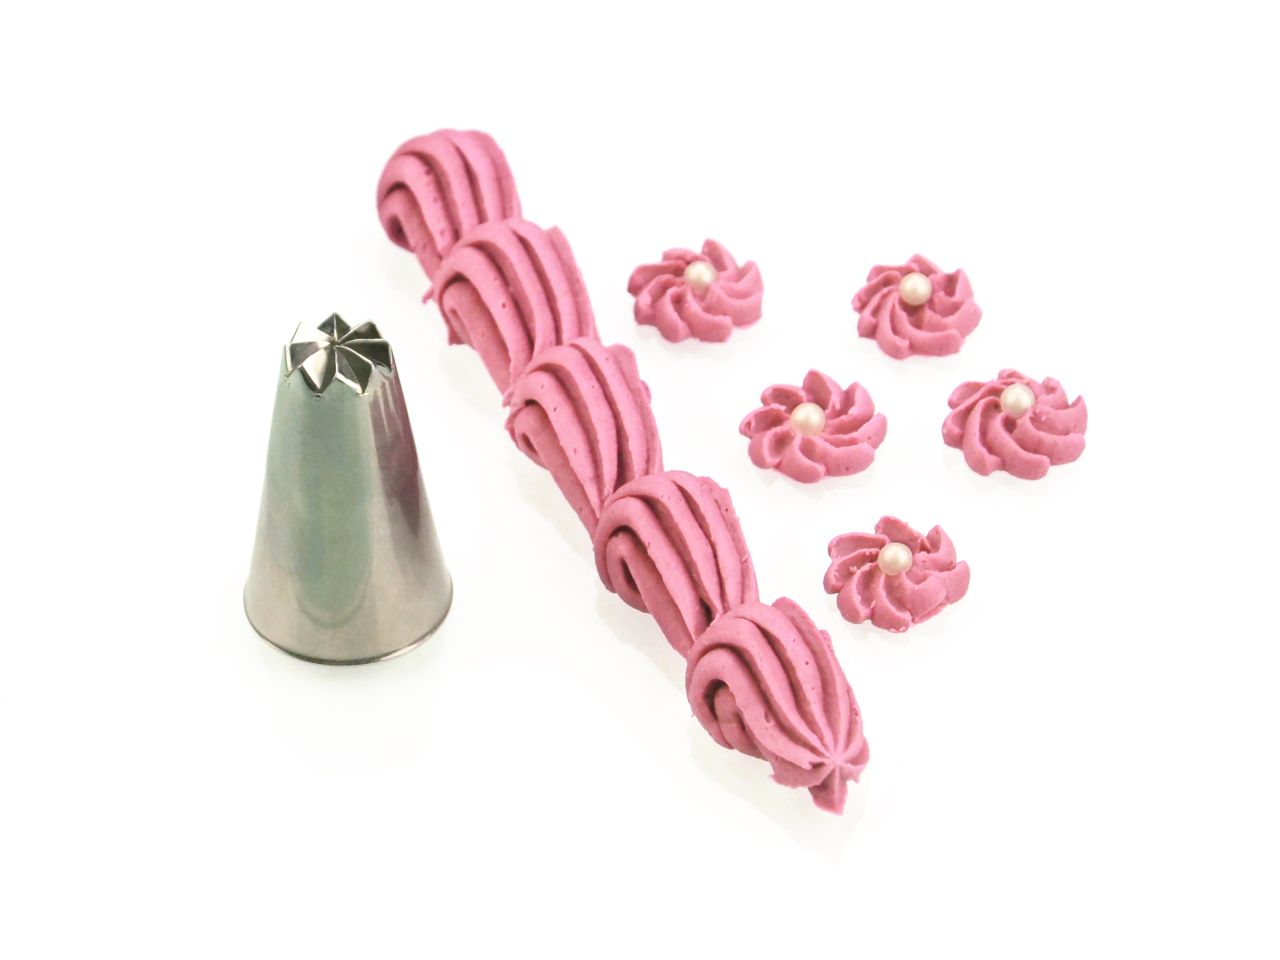 Nozzle flower stainless steel